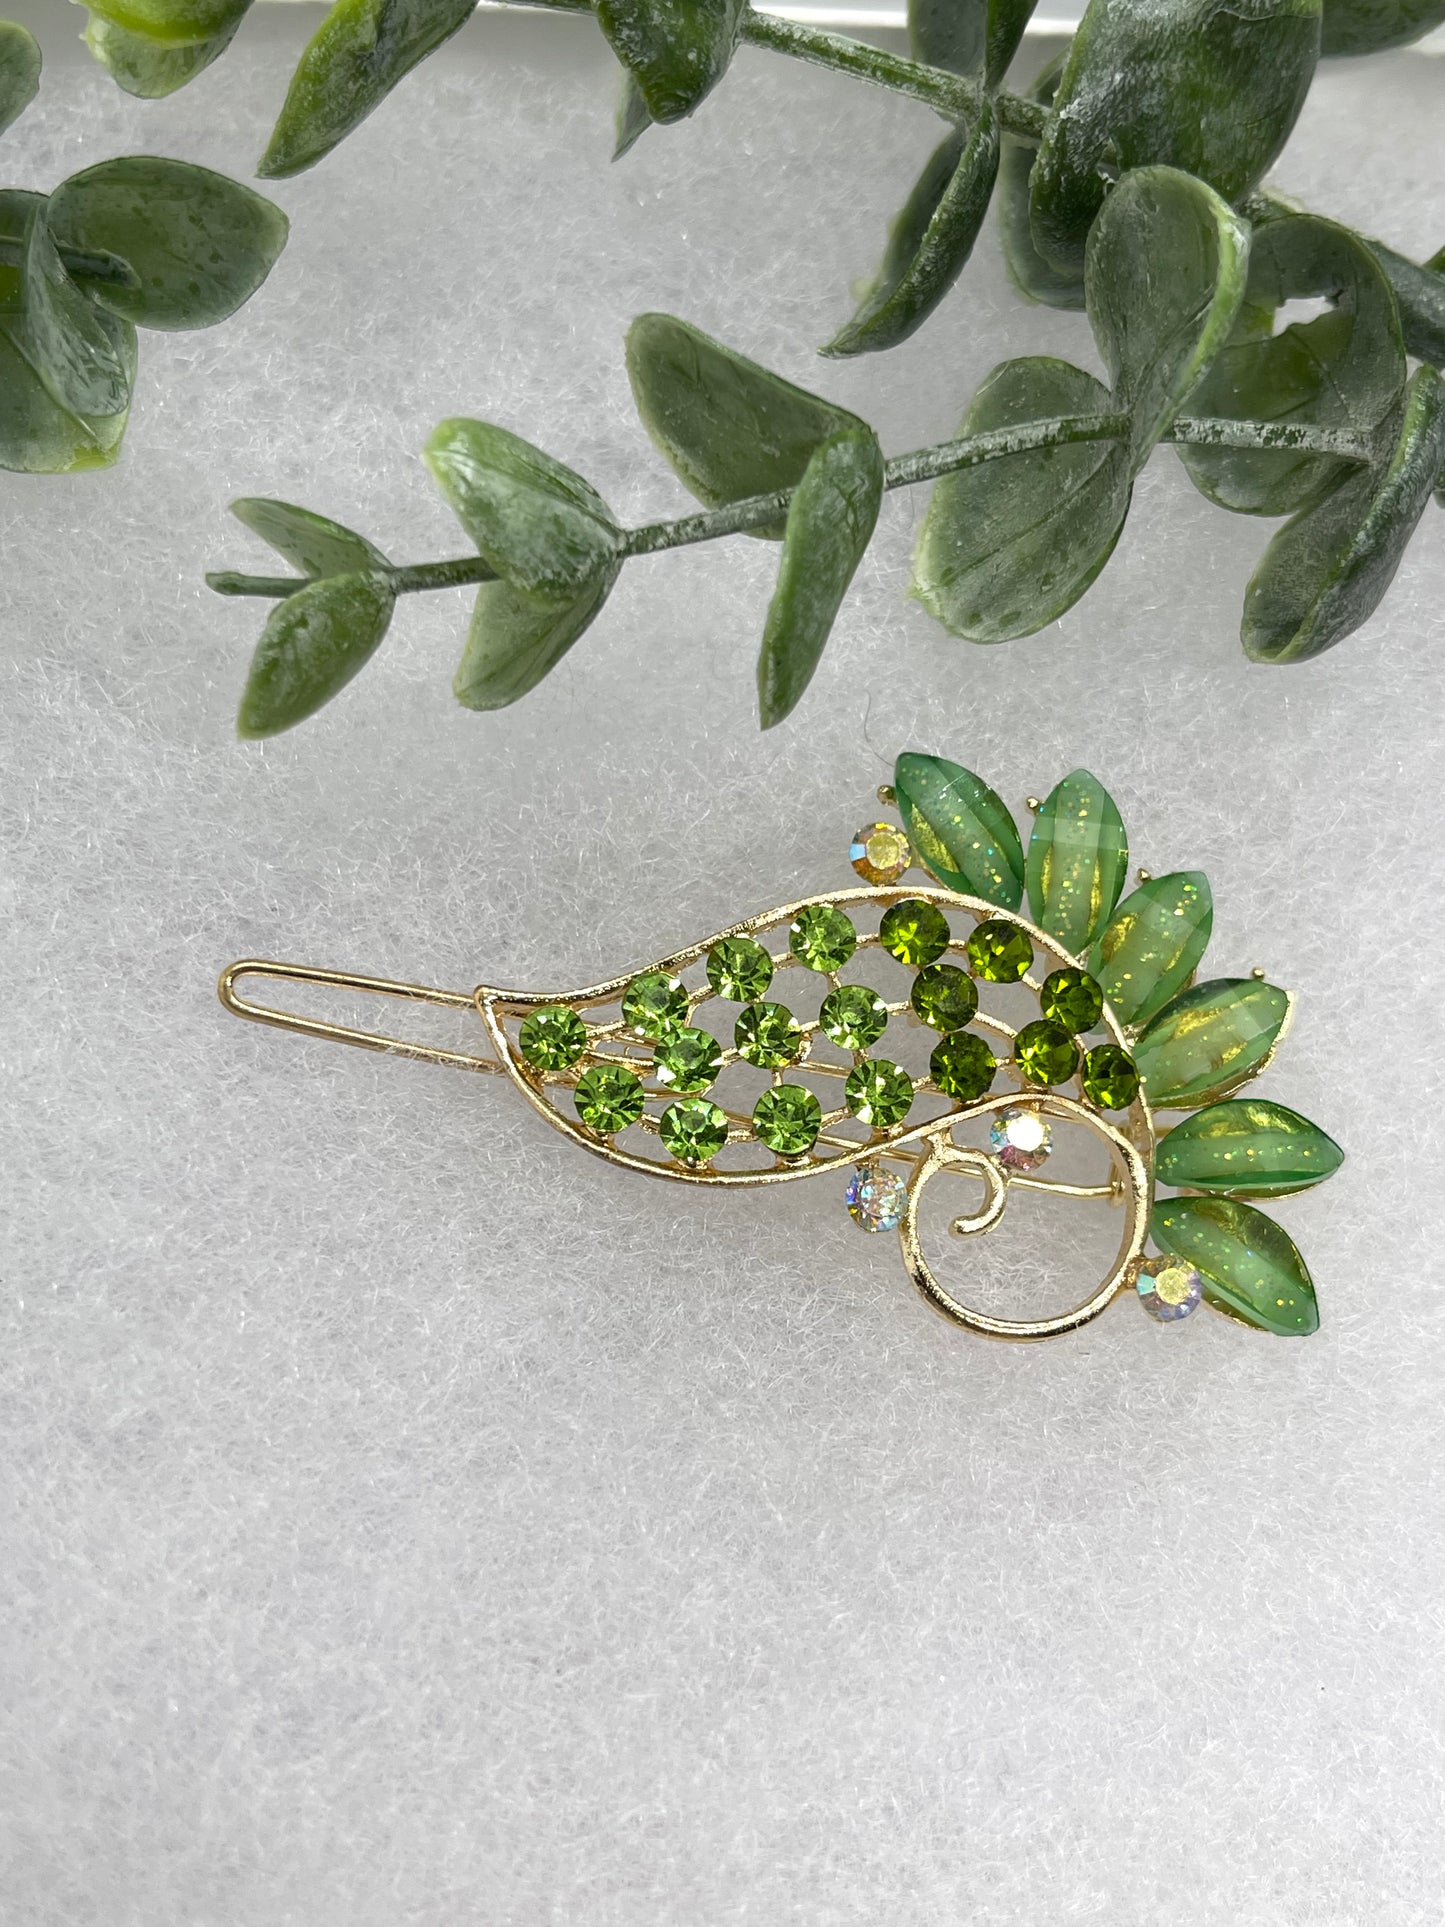 Green Crystal Rhinestone peacock hair clip approximately 3.0”Metal gold tone formal hair accessory gift wedding bridal engagement